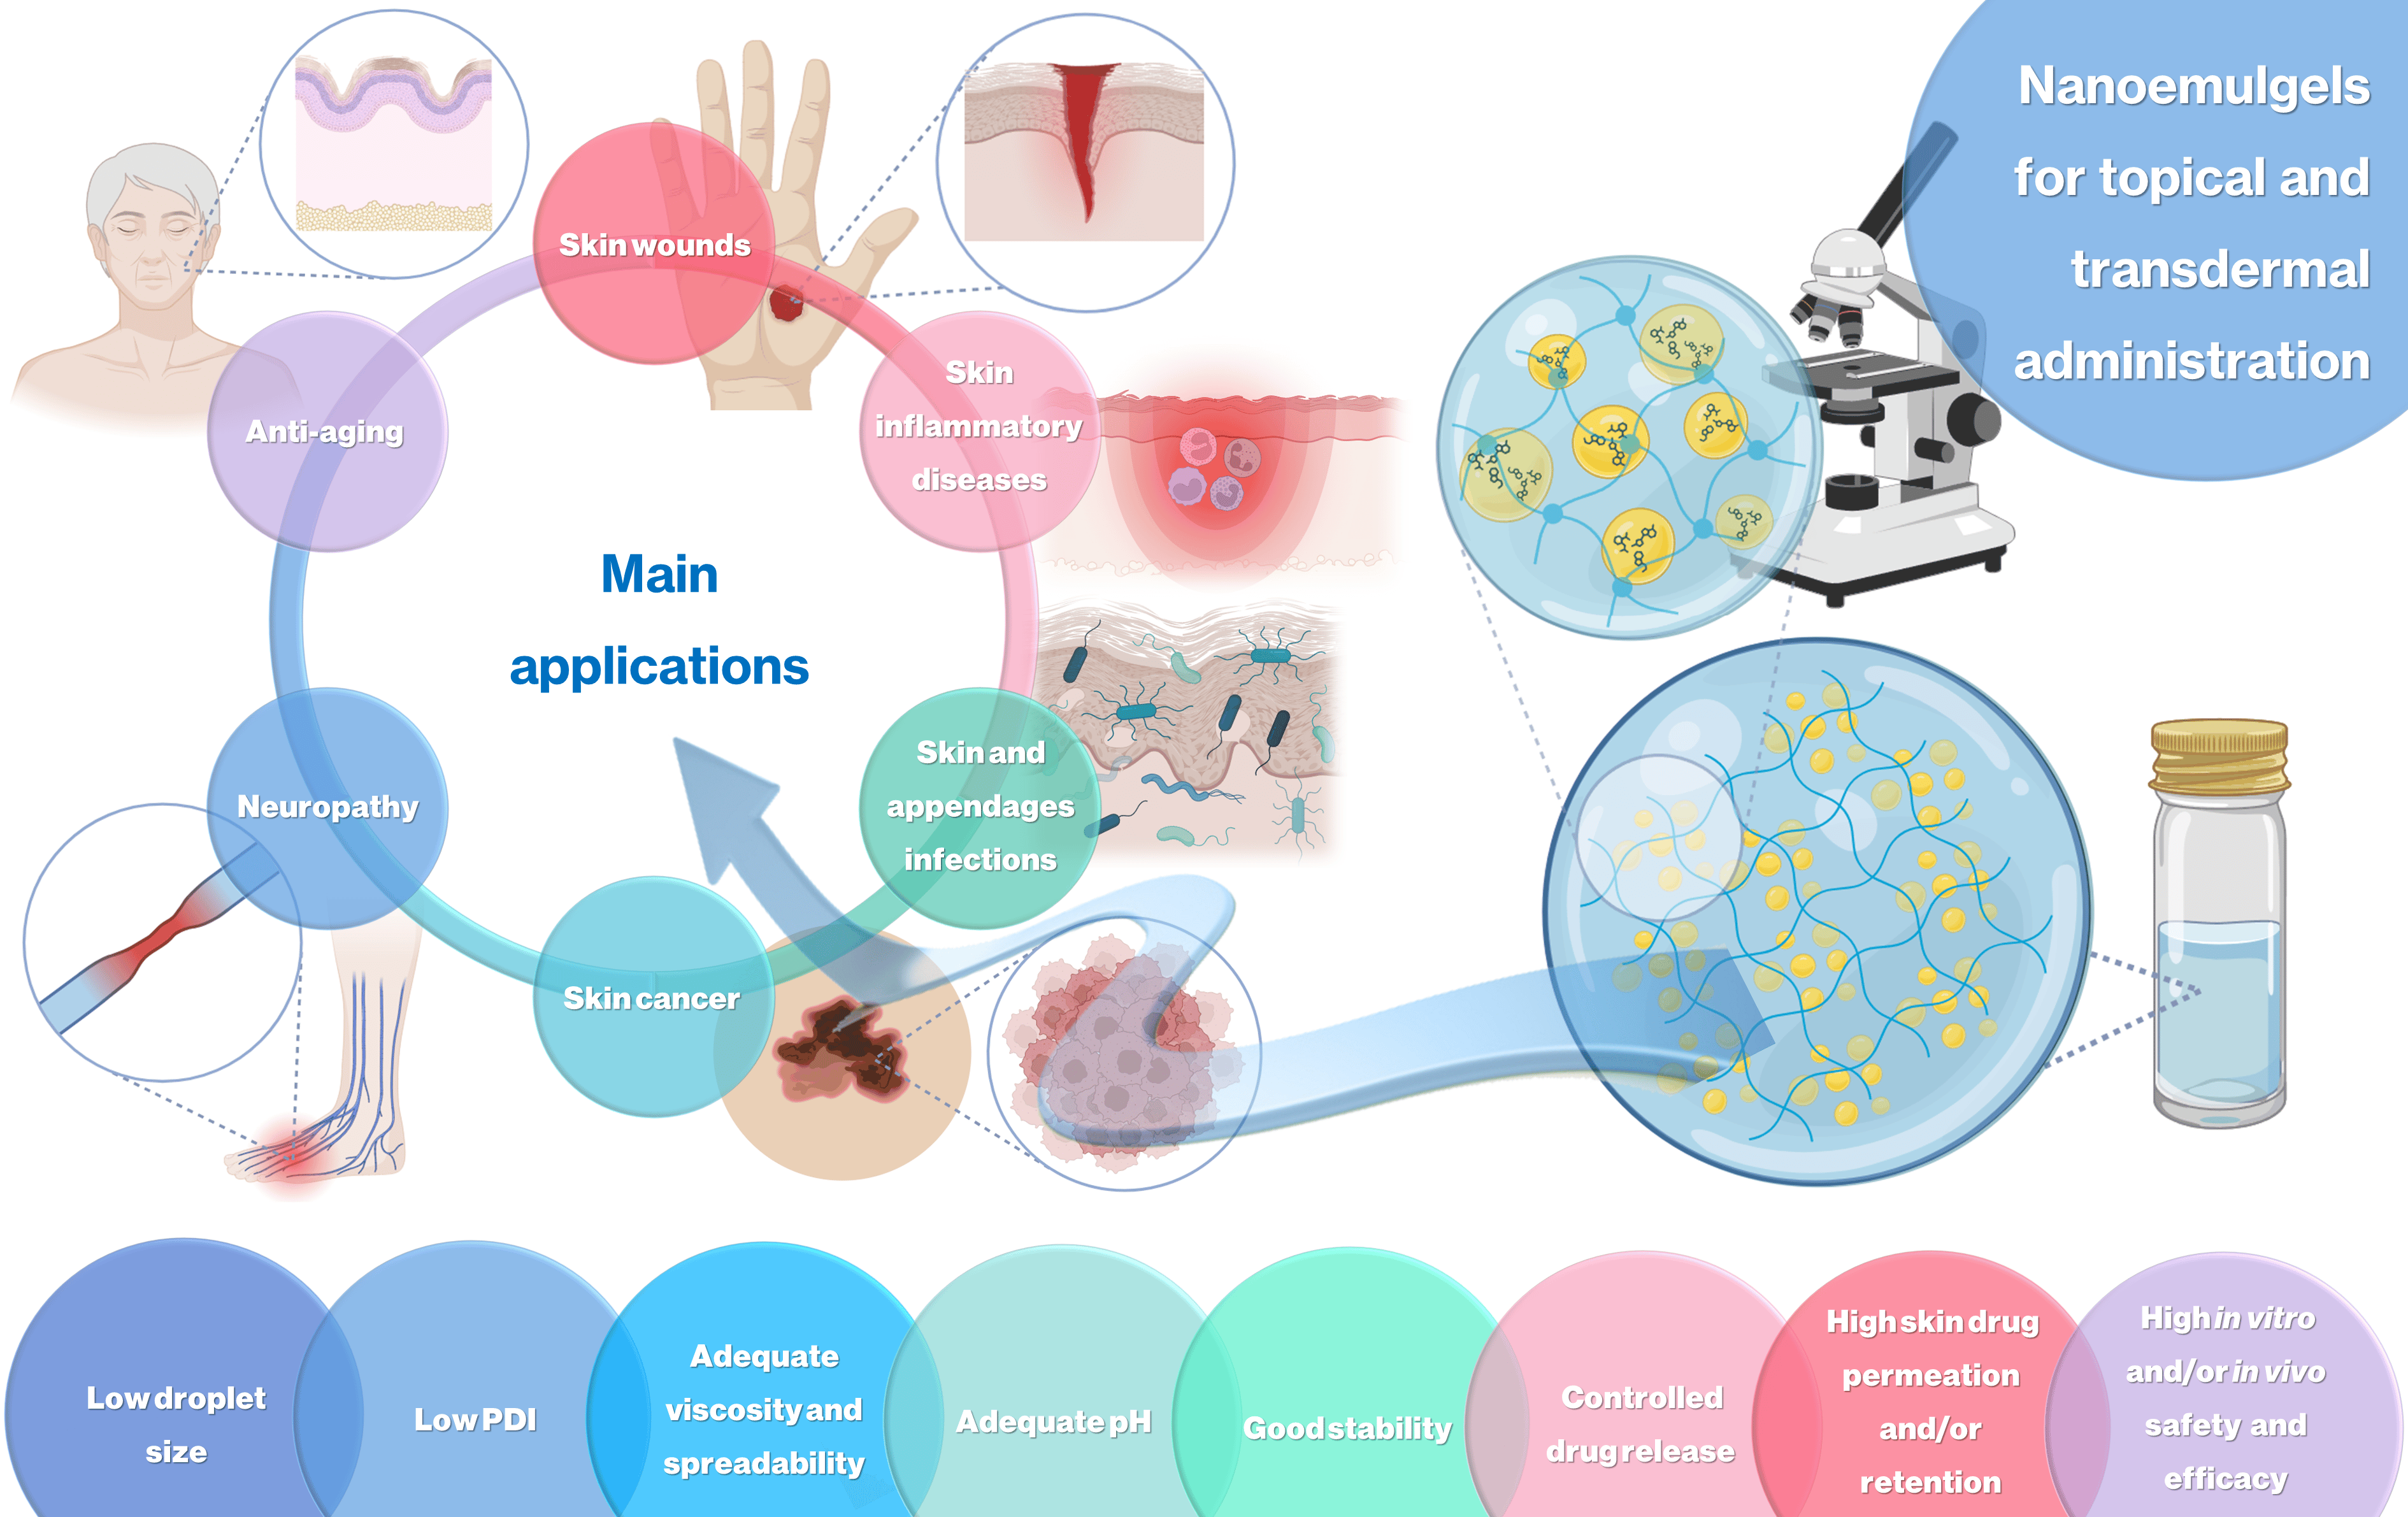 Novel Therapeutic Hybrid Systems Using Hydrogels and Nanotechnology: A Focus on Nanoemulgels for the Treatment of Skin Diseases